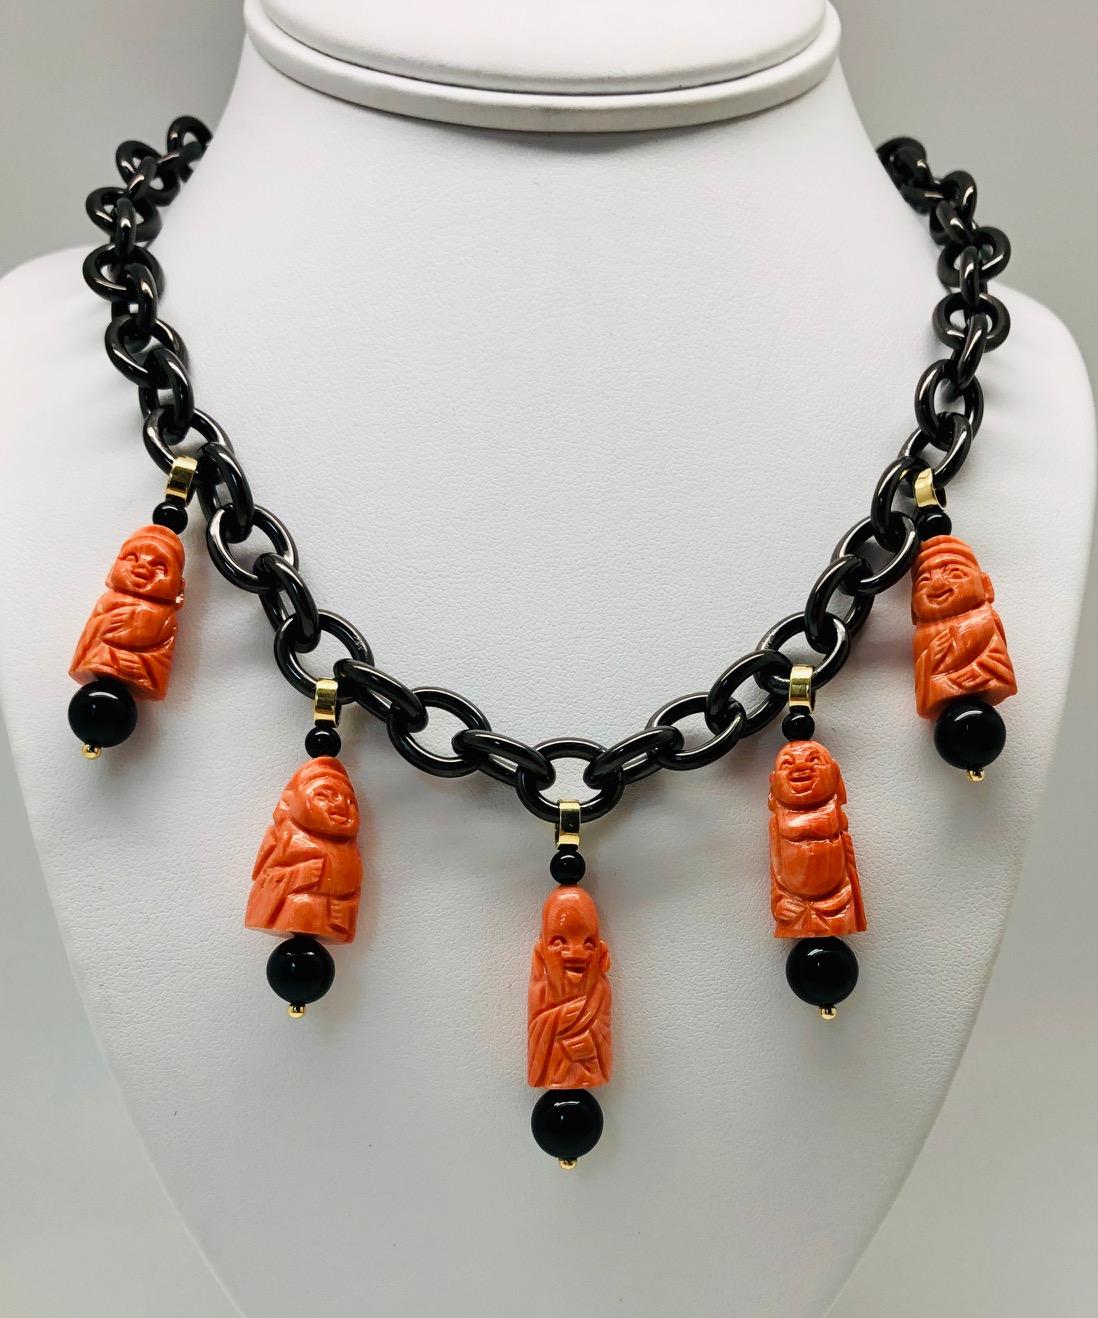 This unusual charm necklace is made of blackened steel and features 5 Mediterranean coral beads that have been hand carved into happy Buddhas and deities. Set with shiny black onyx beads and 18k yellow gold accents, this is a unique design combining